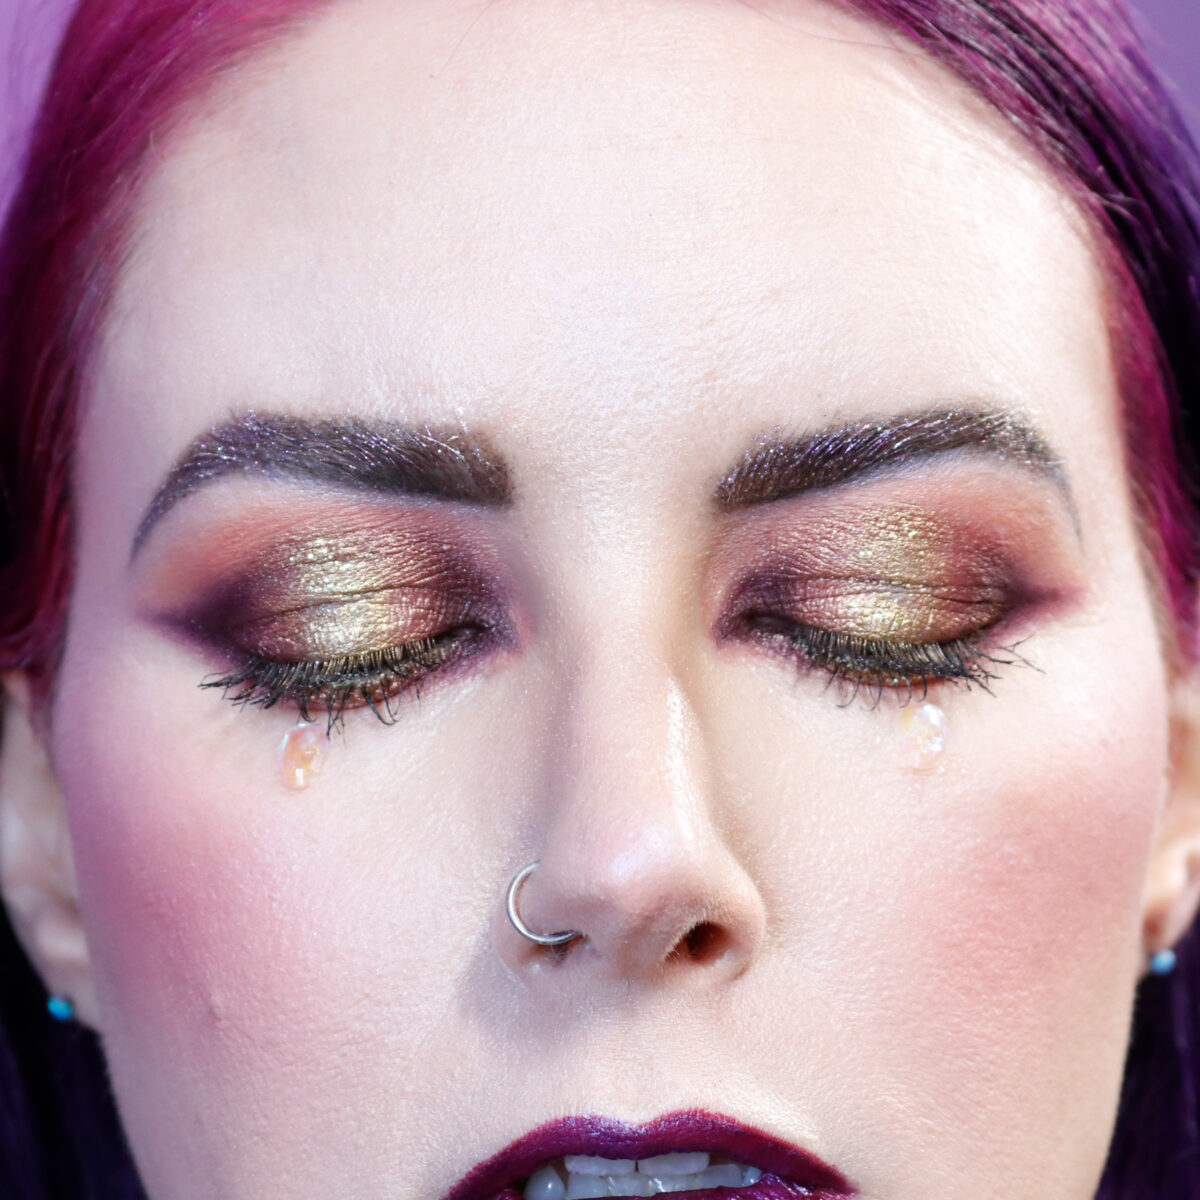 Cordelia is wearing autumn halo eyes makeup on hooded eyes with AB skull accents